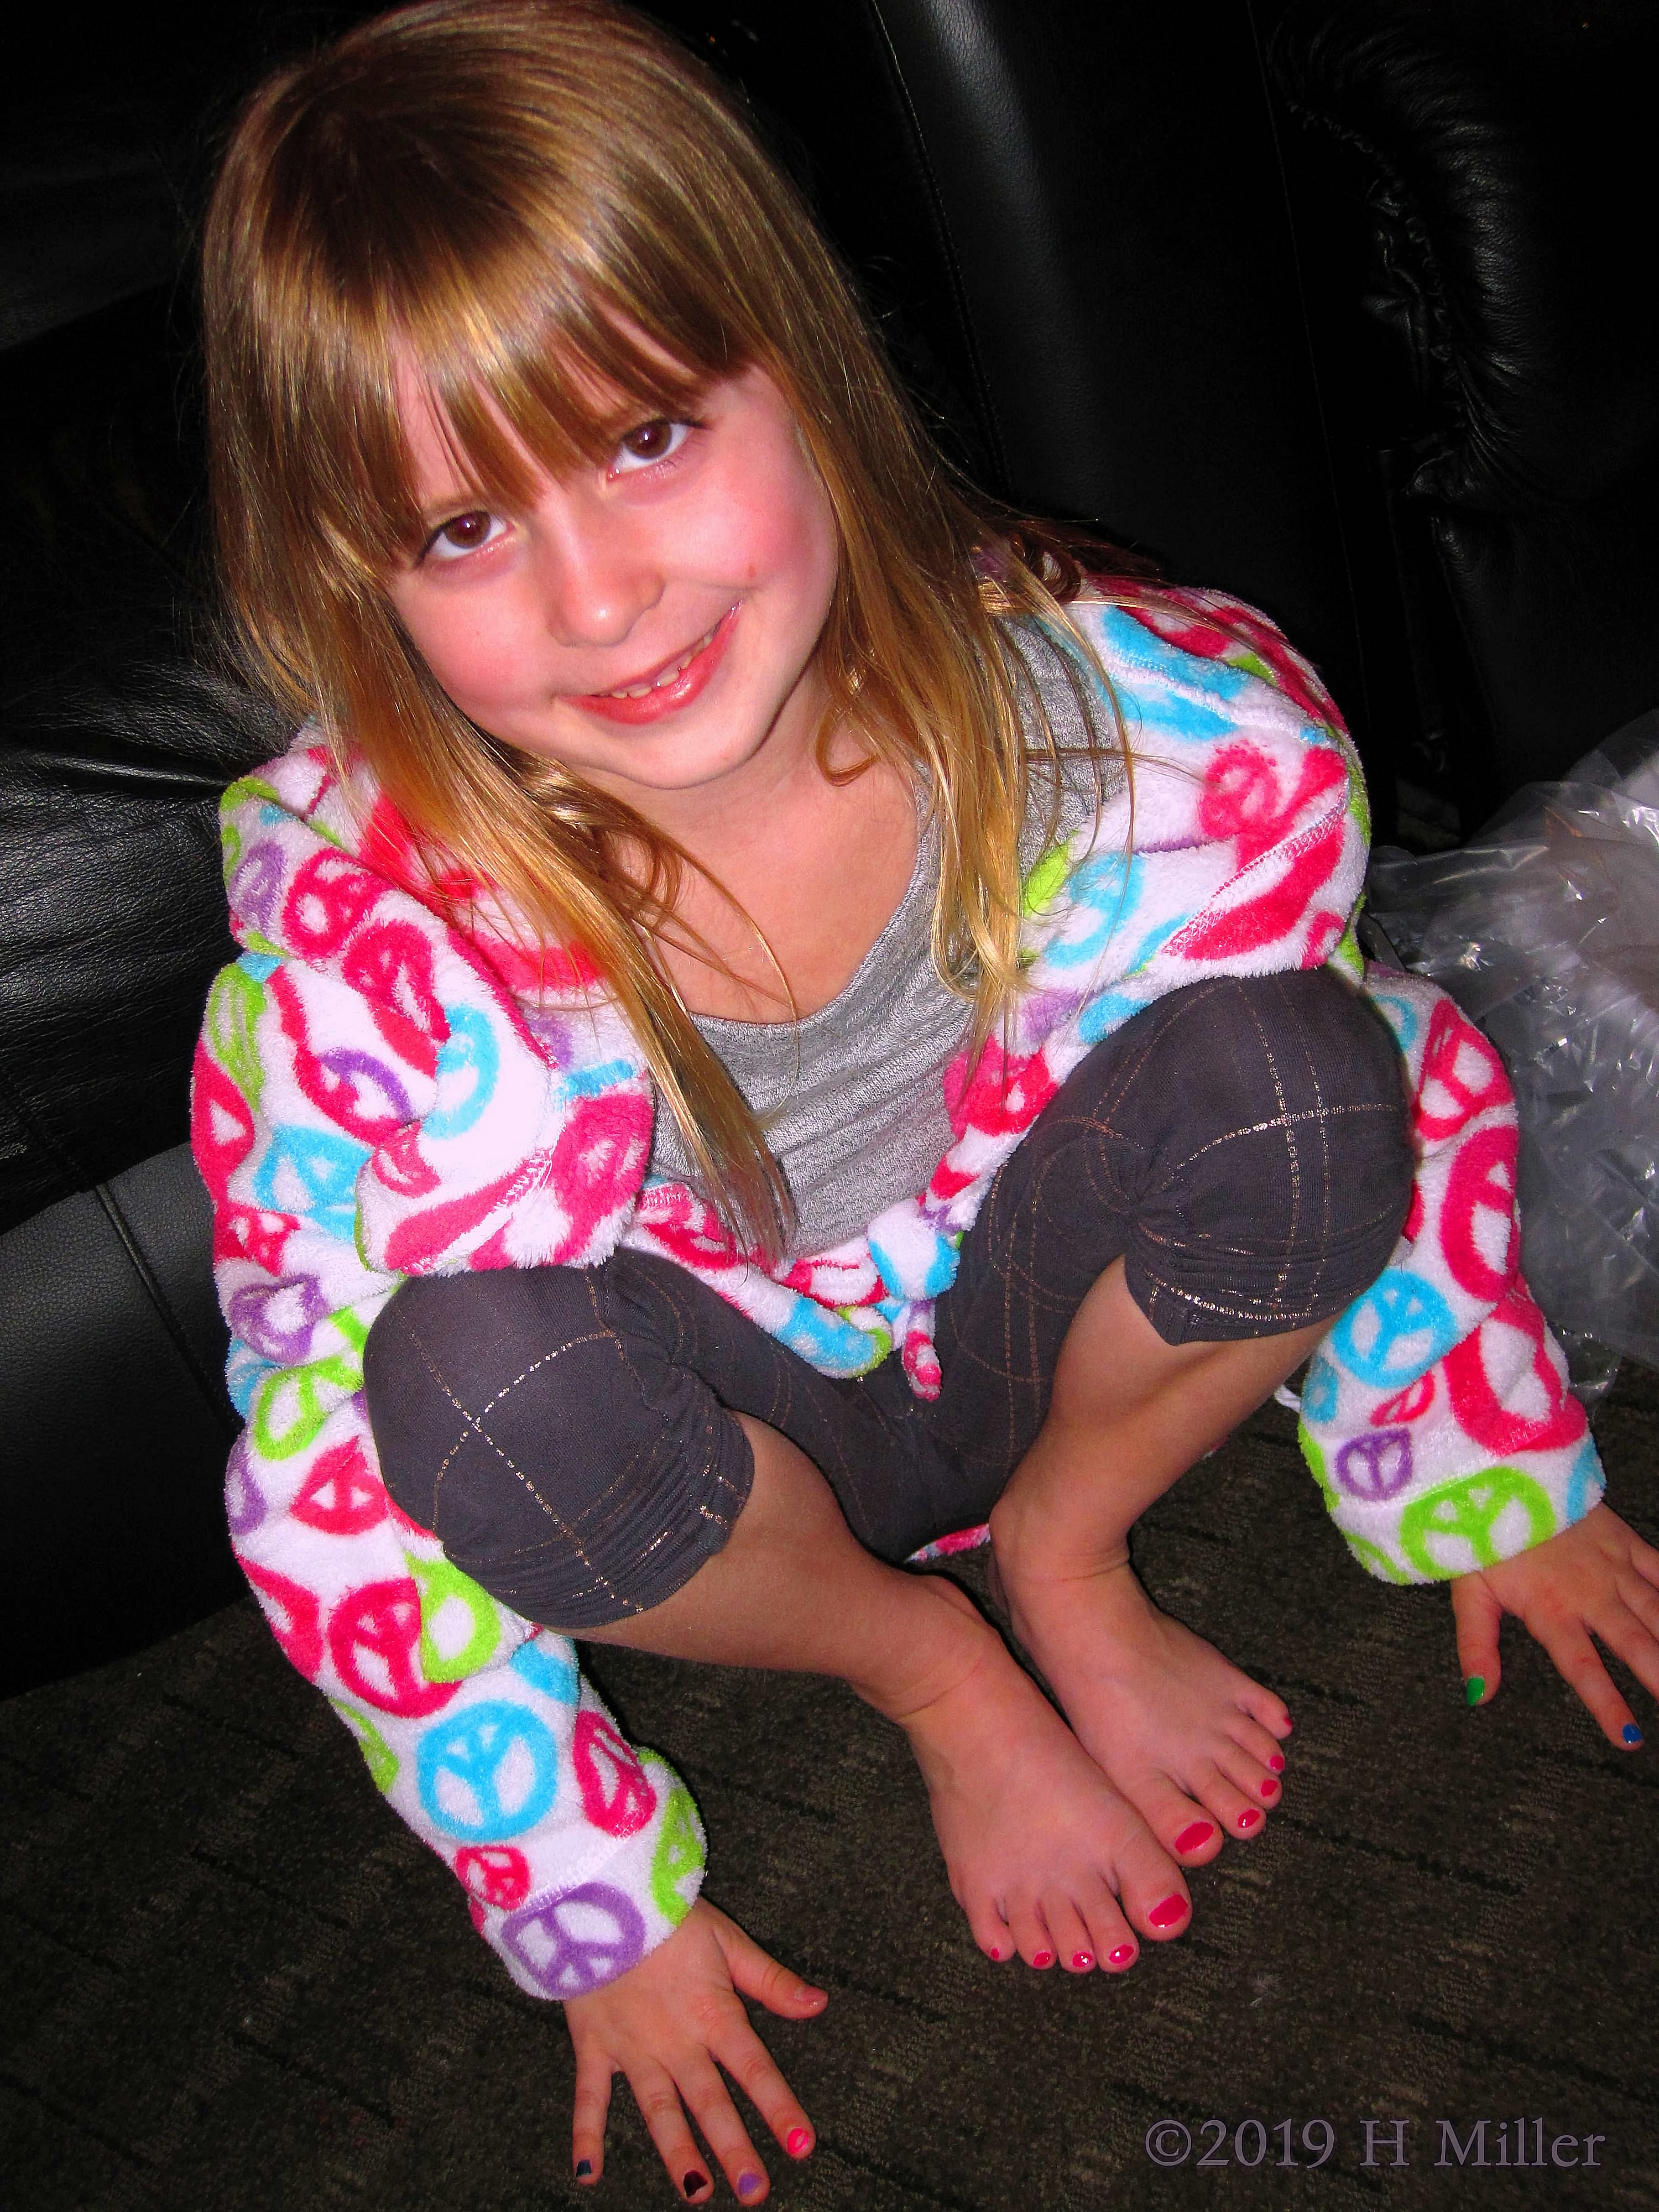 Her Finished Kids Manicure And Pedicure Are Awesome 